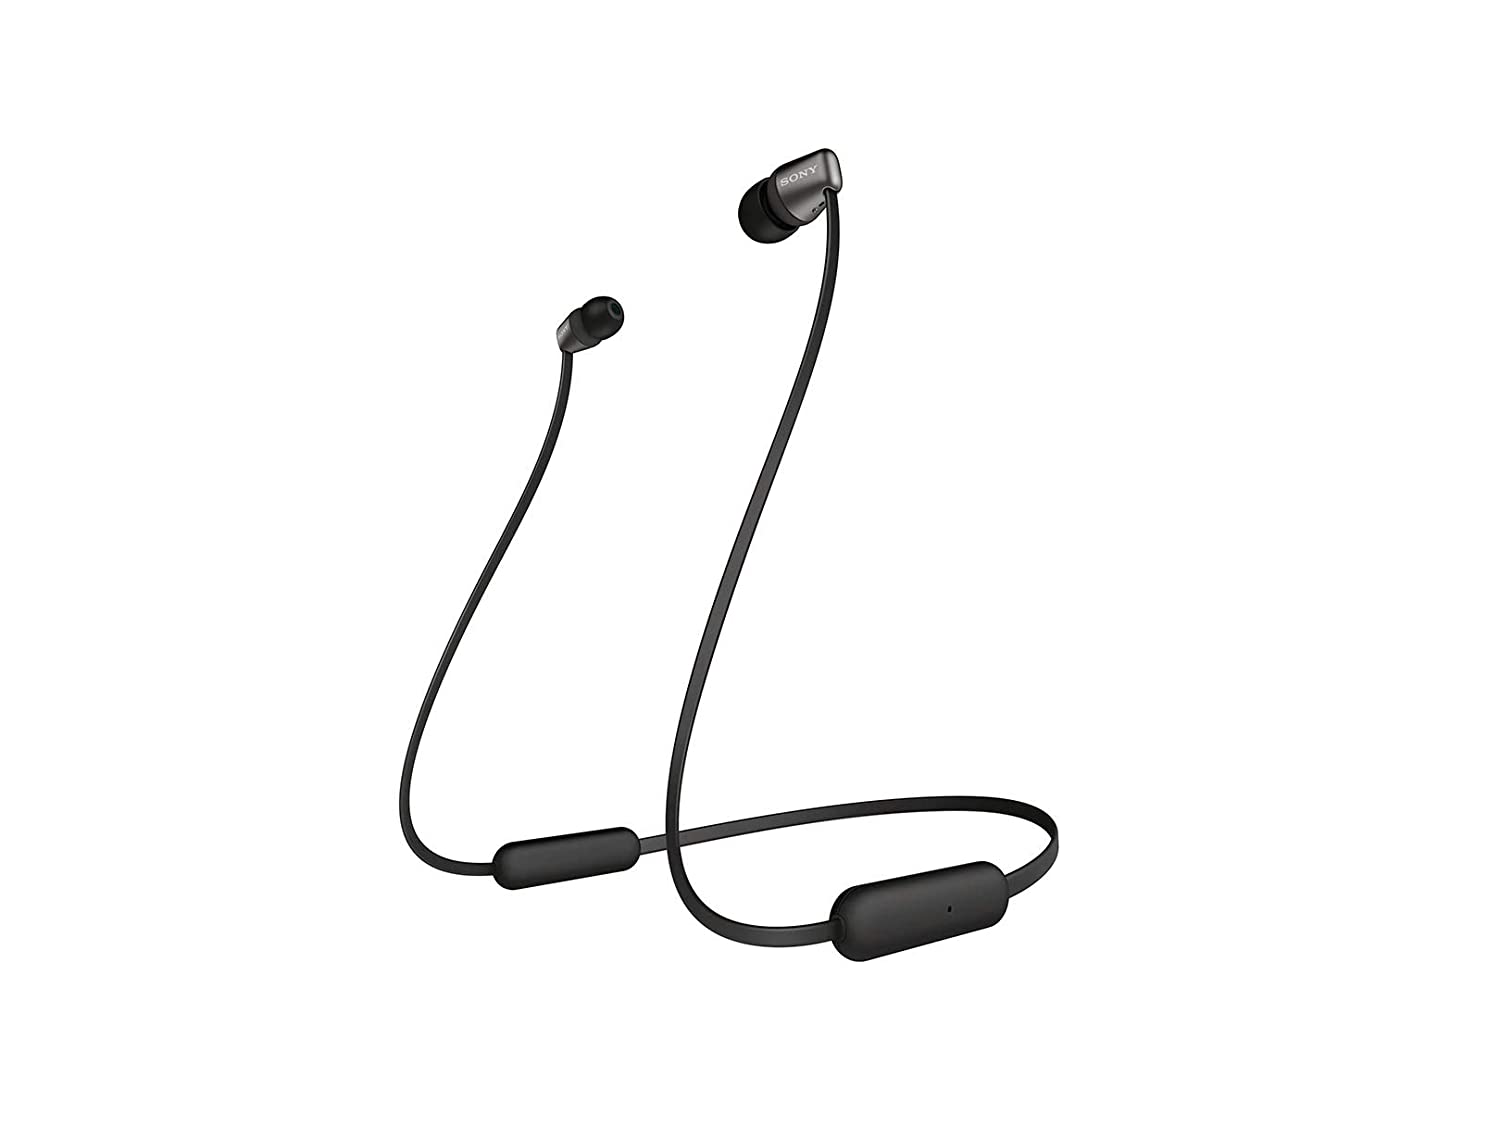 Sony Wireless in-Ear Headset/Headphones with Mic for Phone Call, Black (WI- C310/B) – Quickart